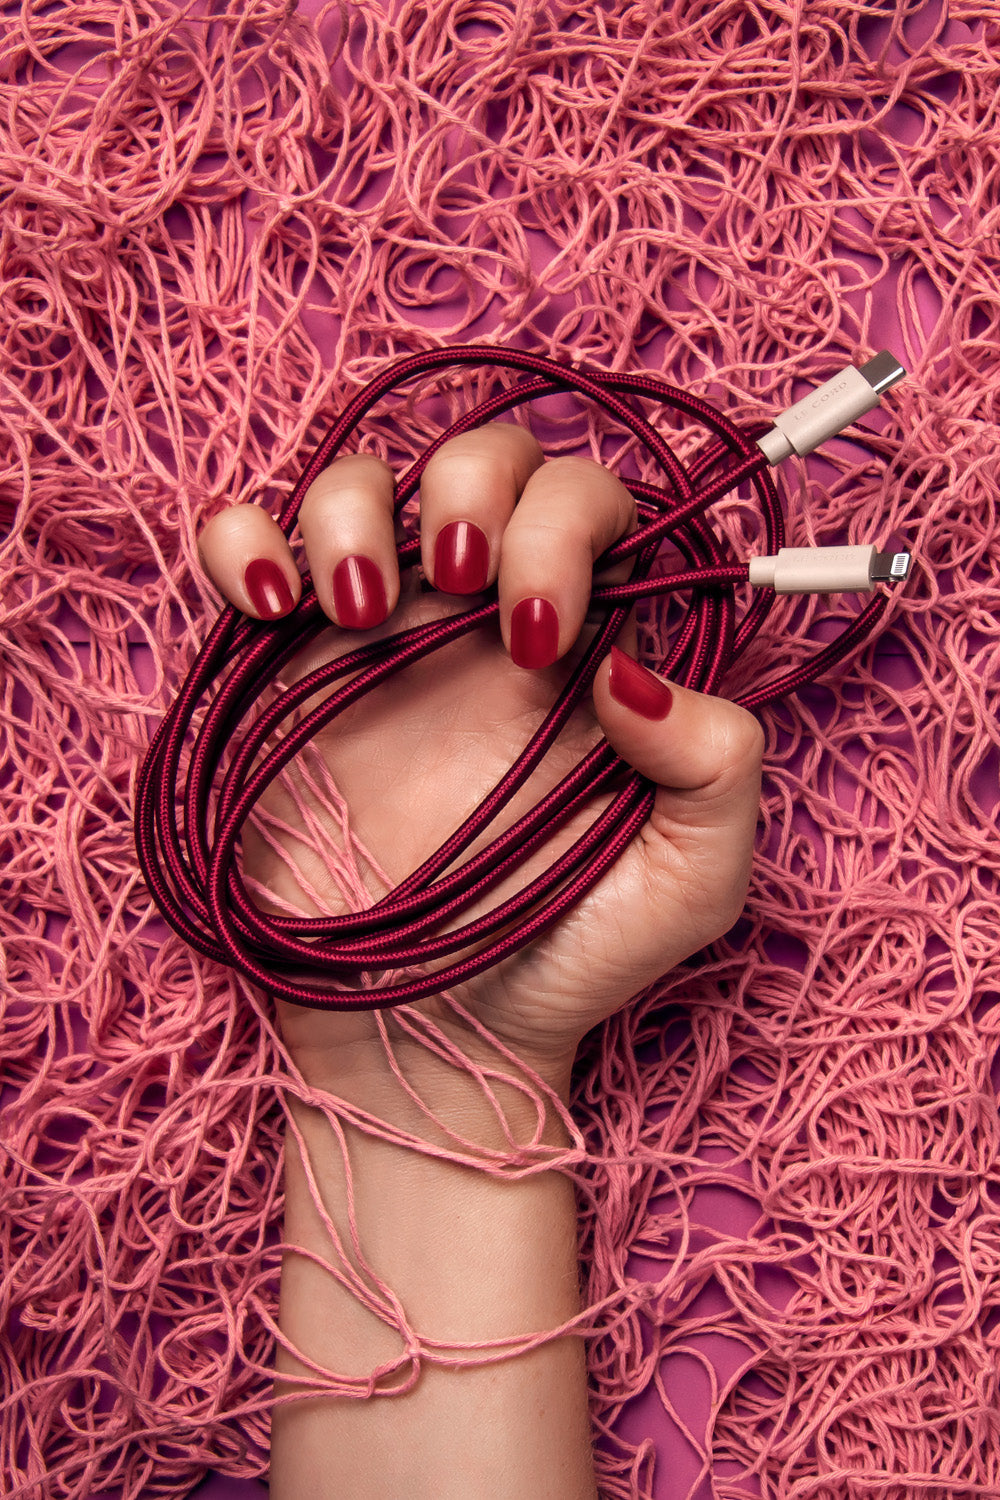 Plum iPhone Lightning cable - 2 meter - Made of recycled fishing nets